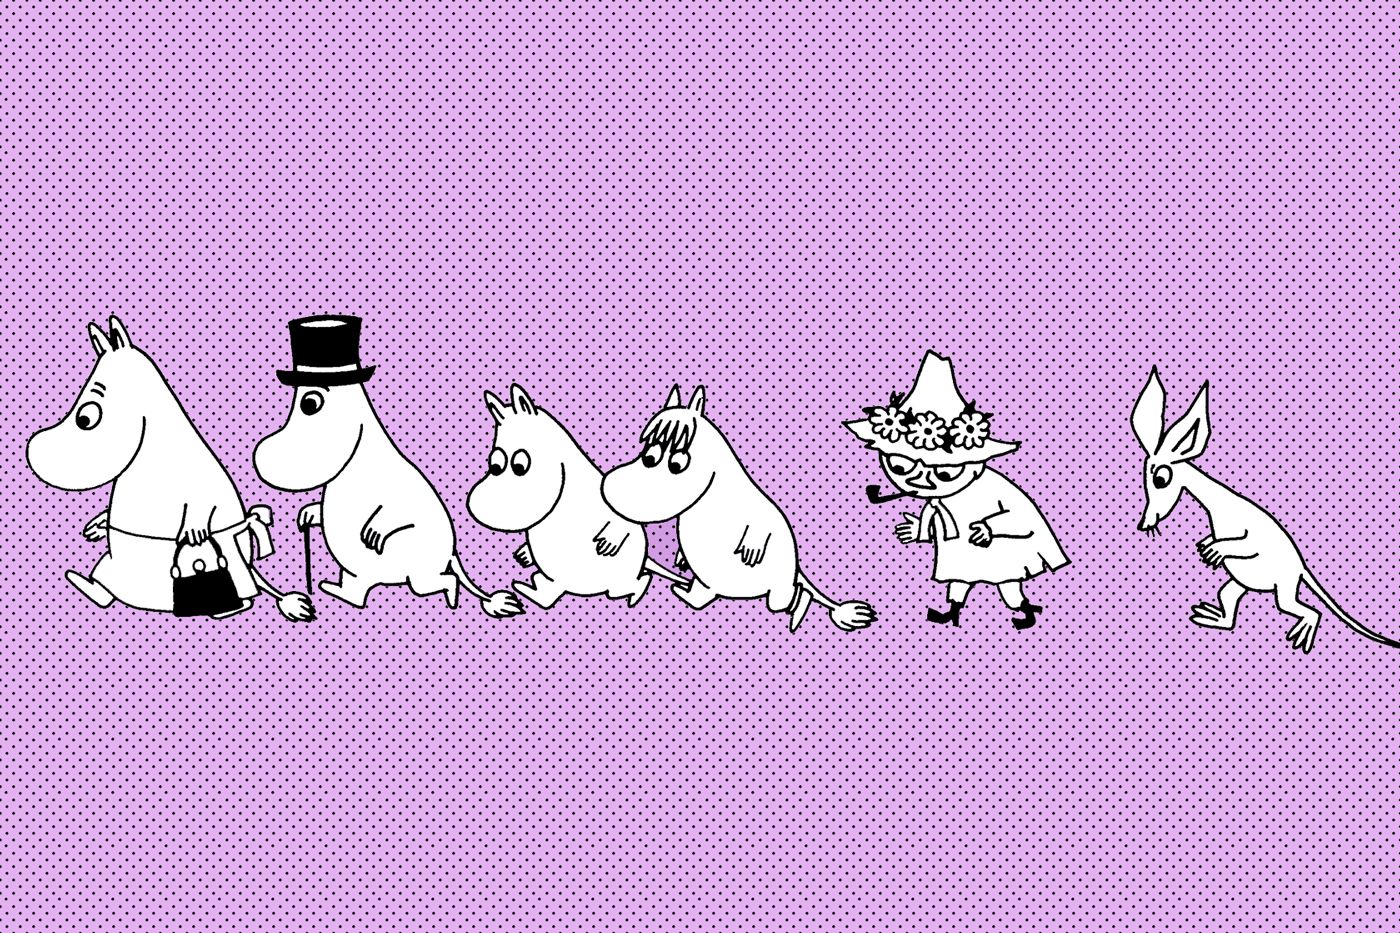 The most profound Moomins quotes for all moments in life